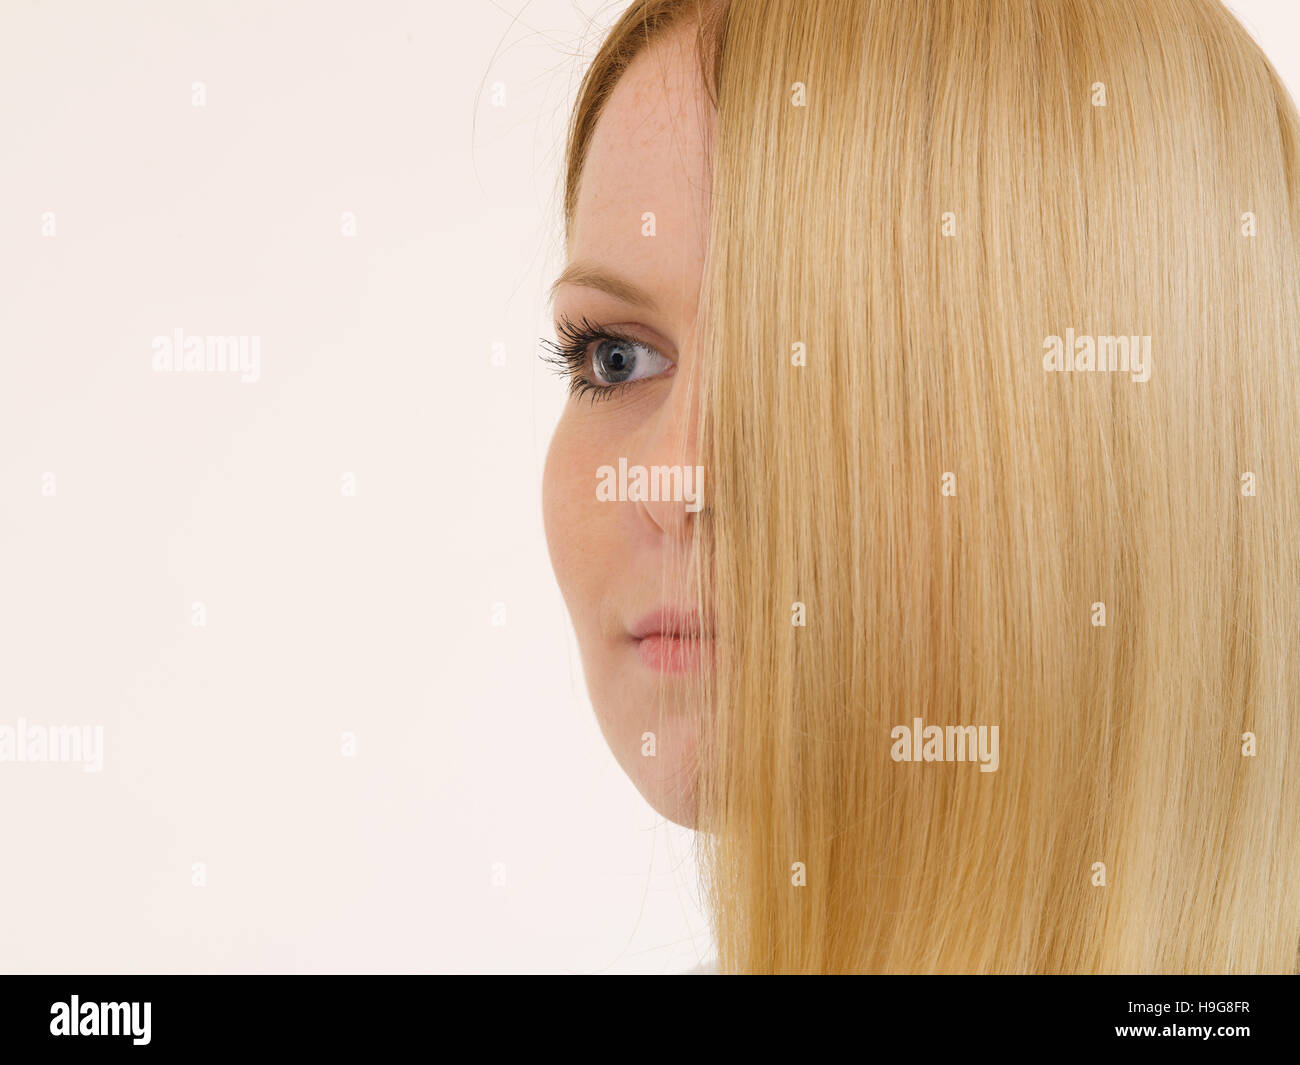 Woman with half her face covered by hair Stock Photo